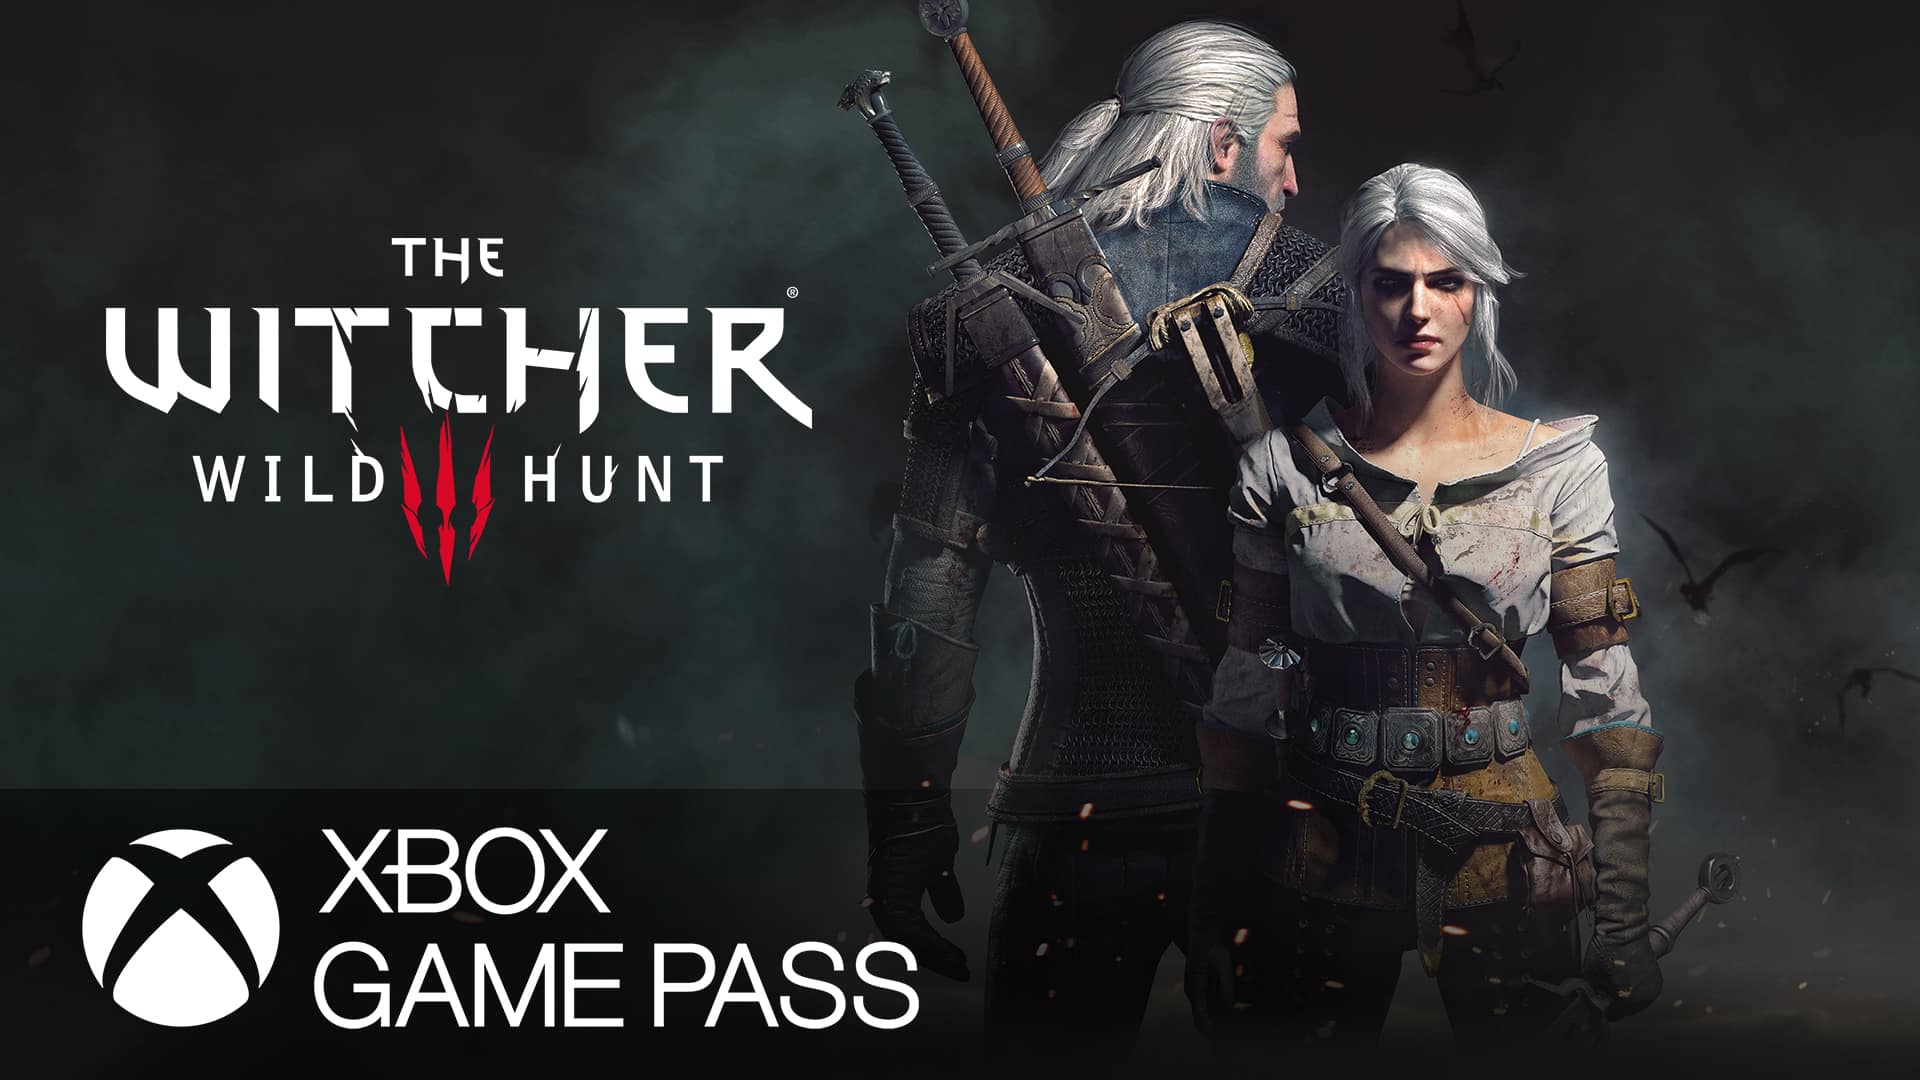 The Witcher 3: Wild Hunt Heading to Xbox Game Pass Dec. 19